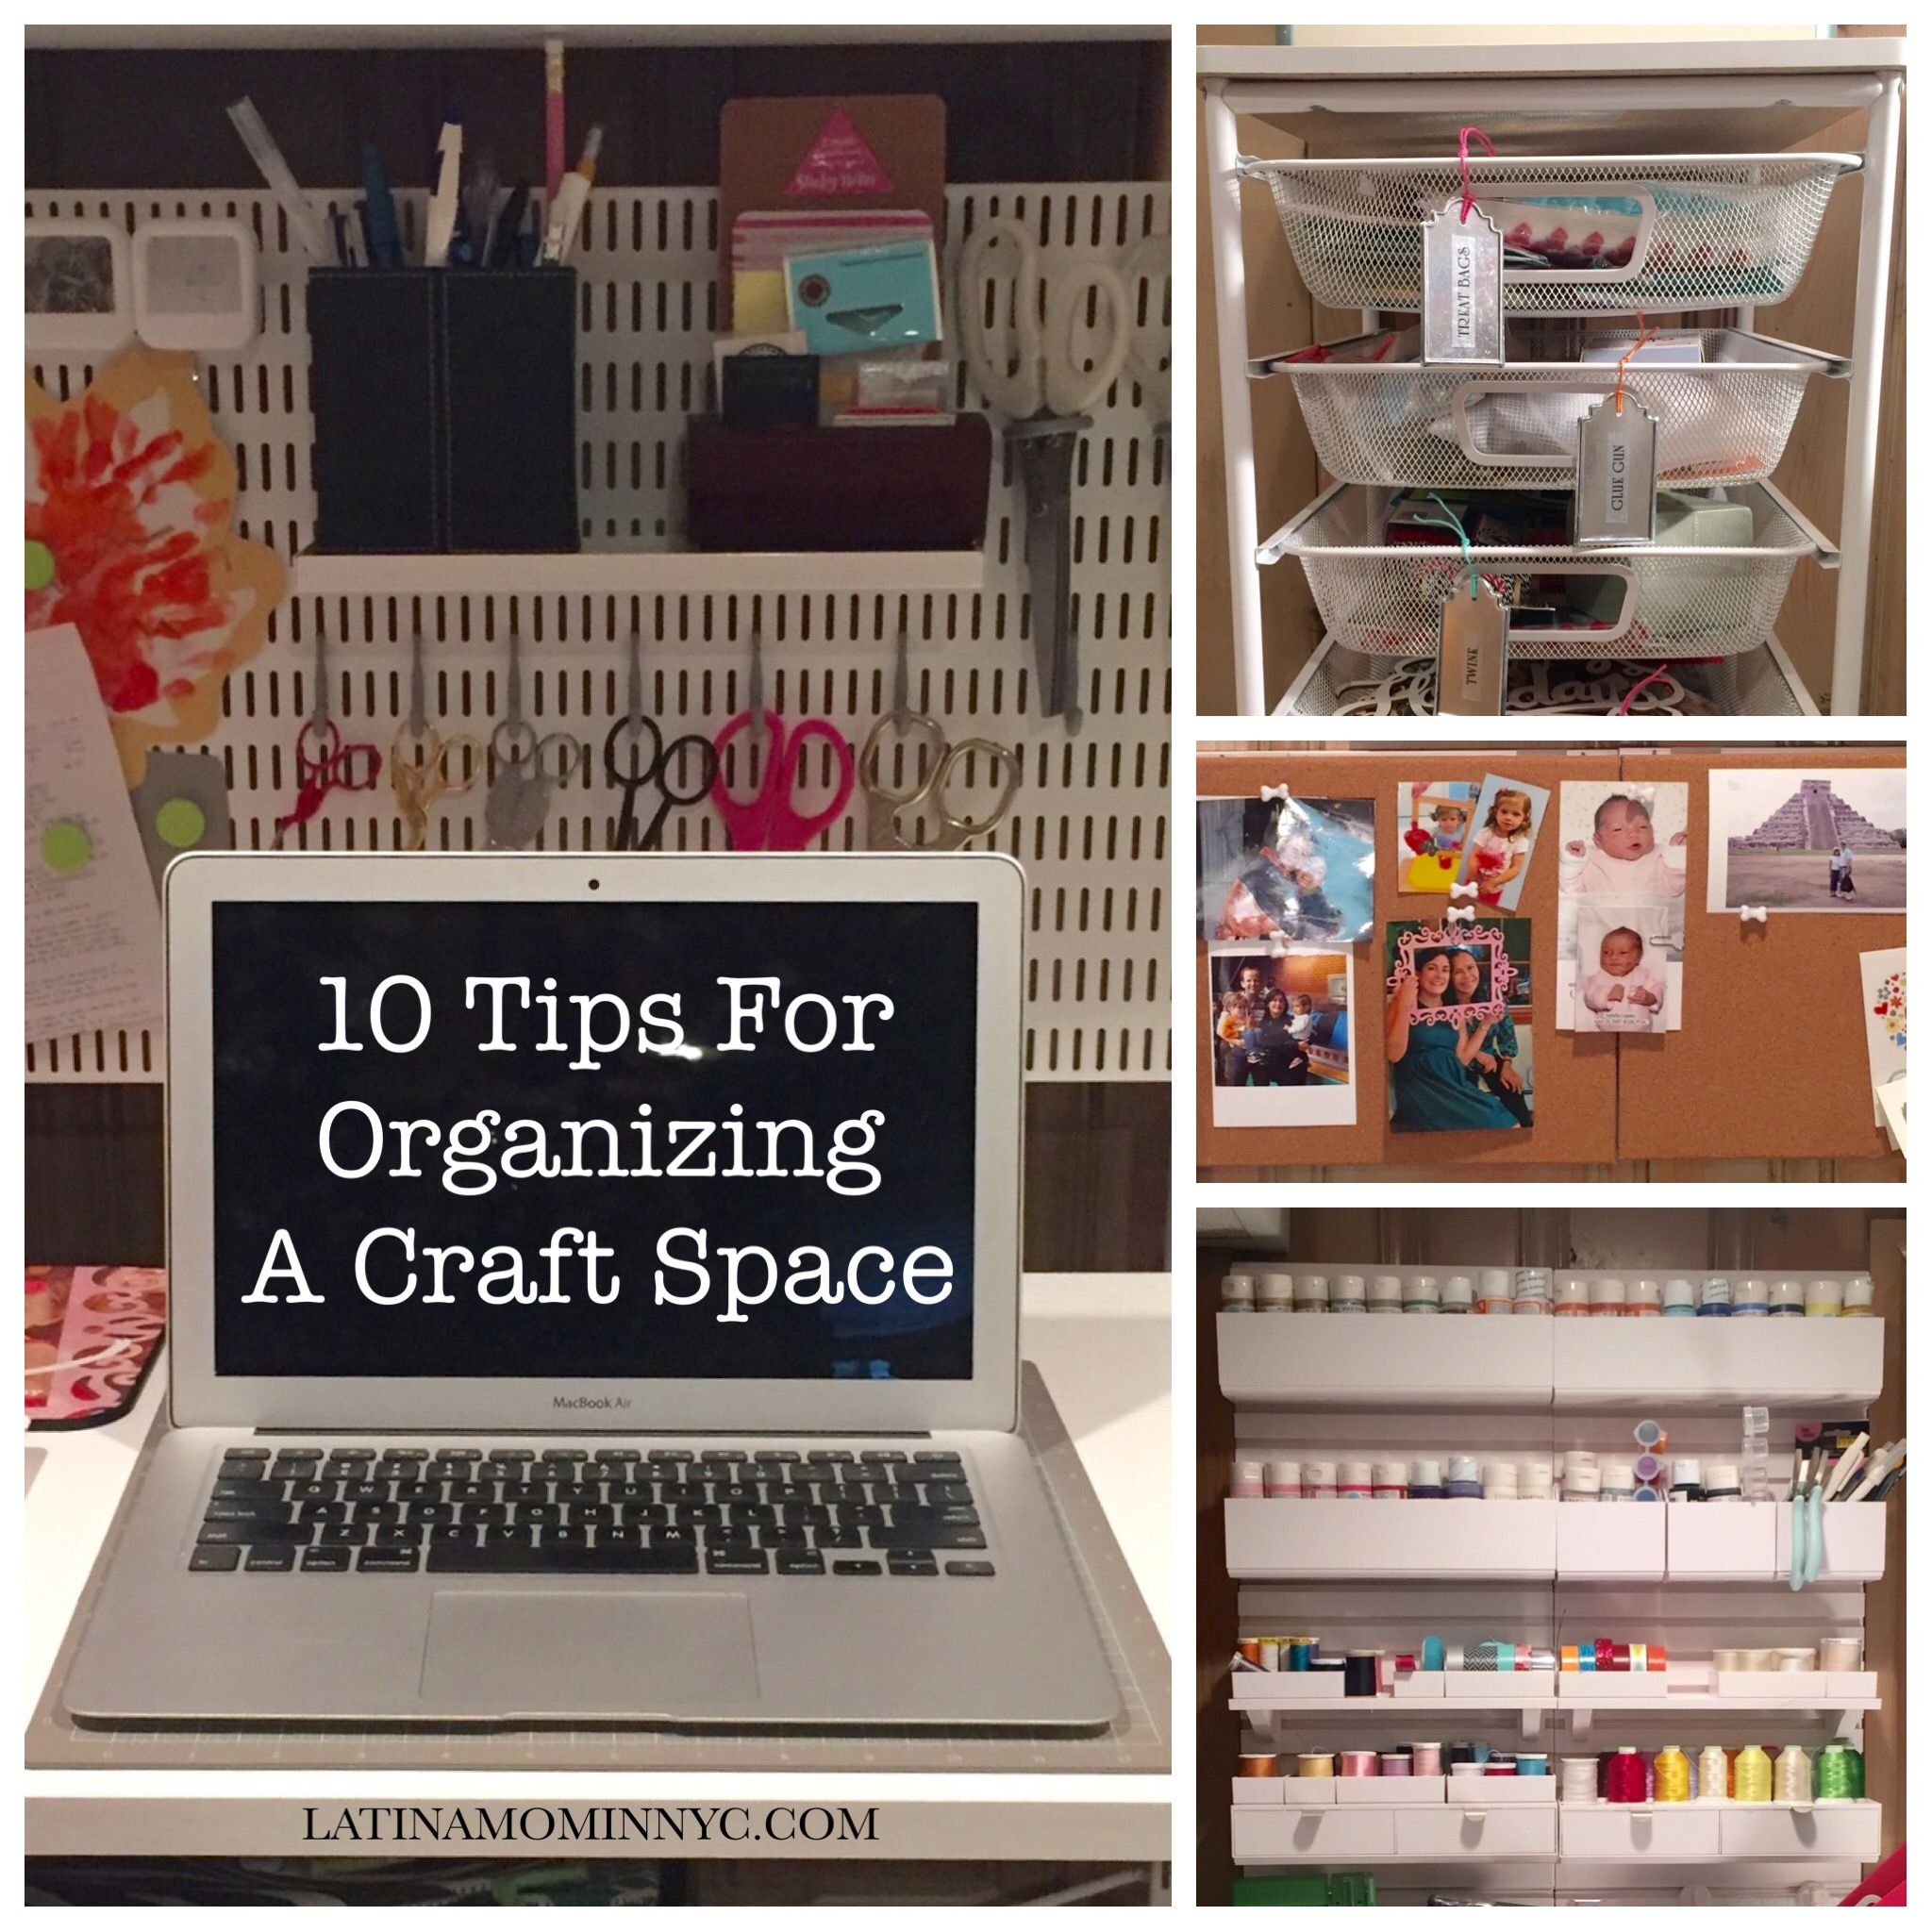 10 Tips for Organizing Your Craft Space - Latina Mom in NYC